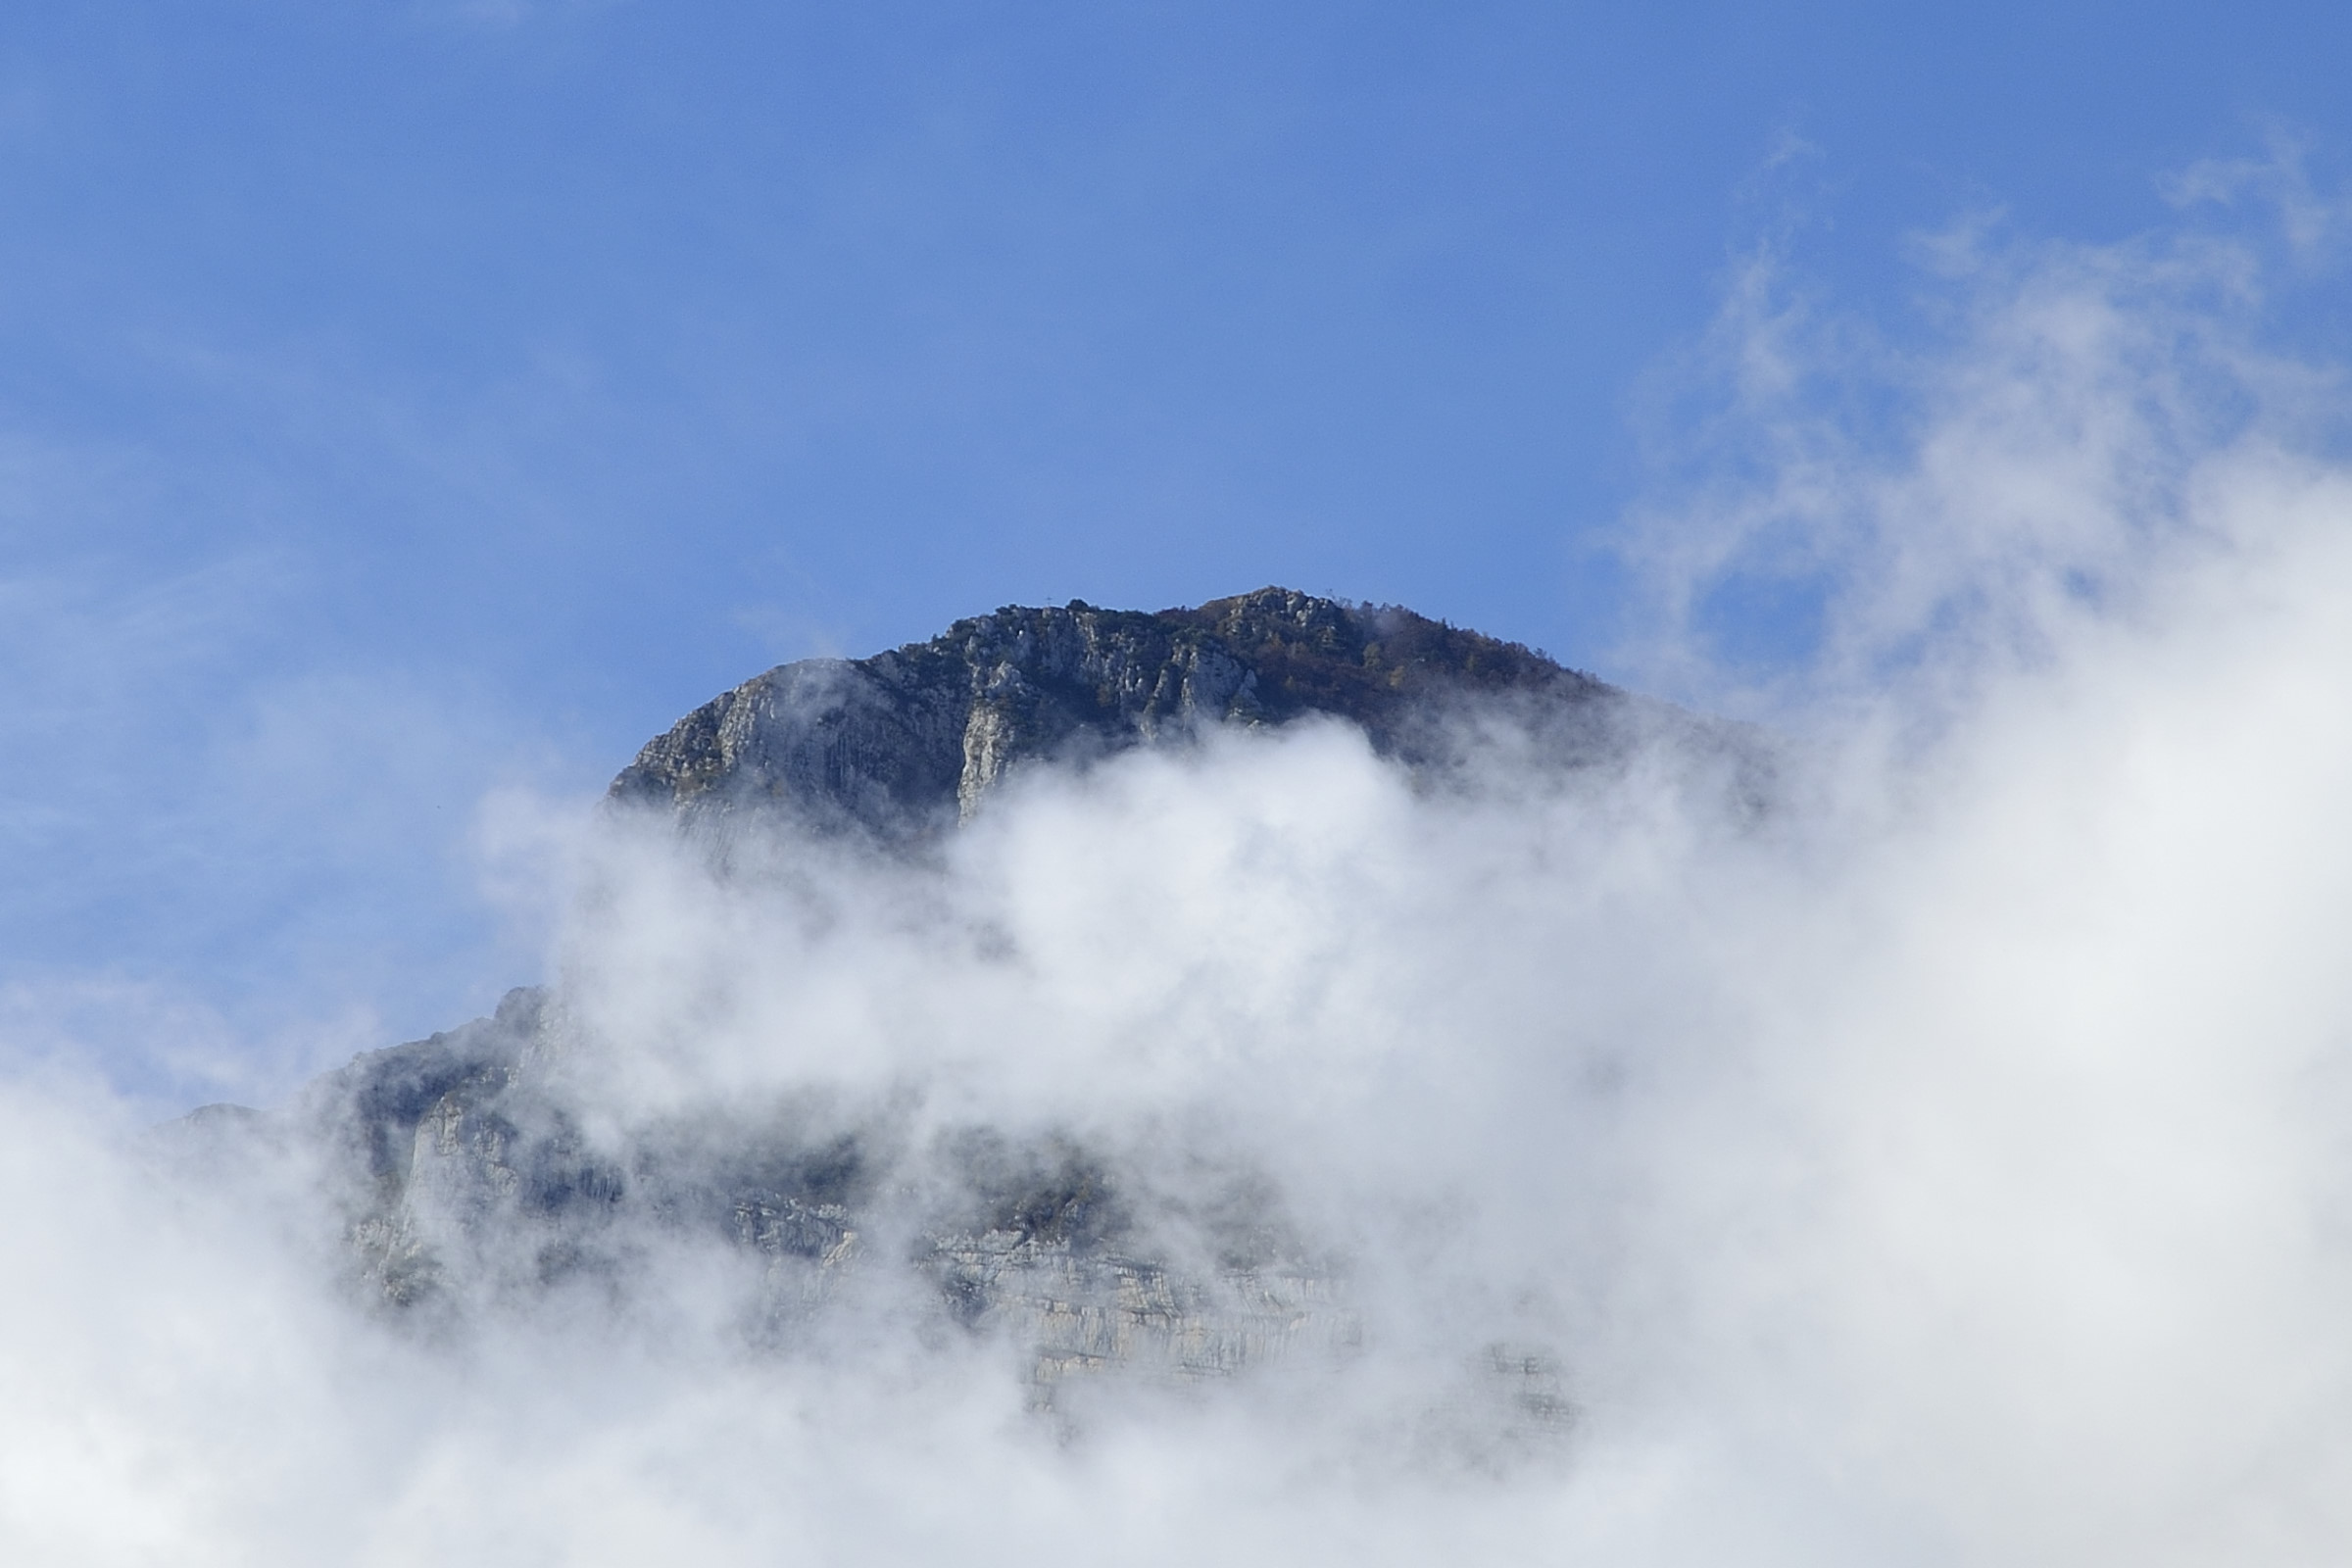 ... in the clouds. Mount Vignola...